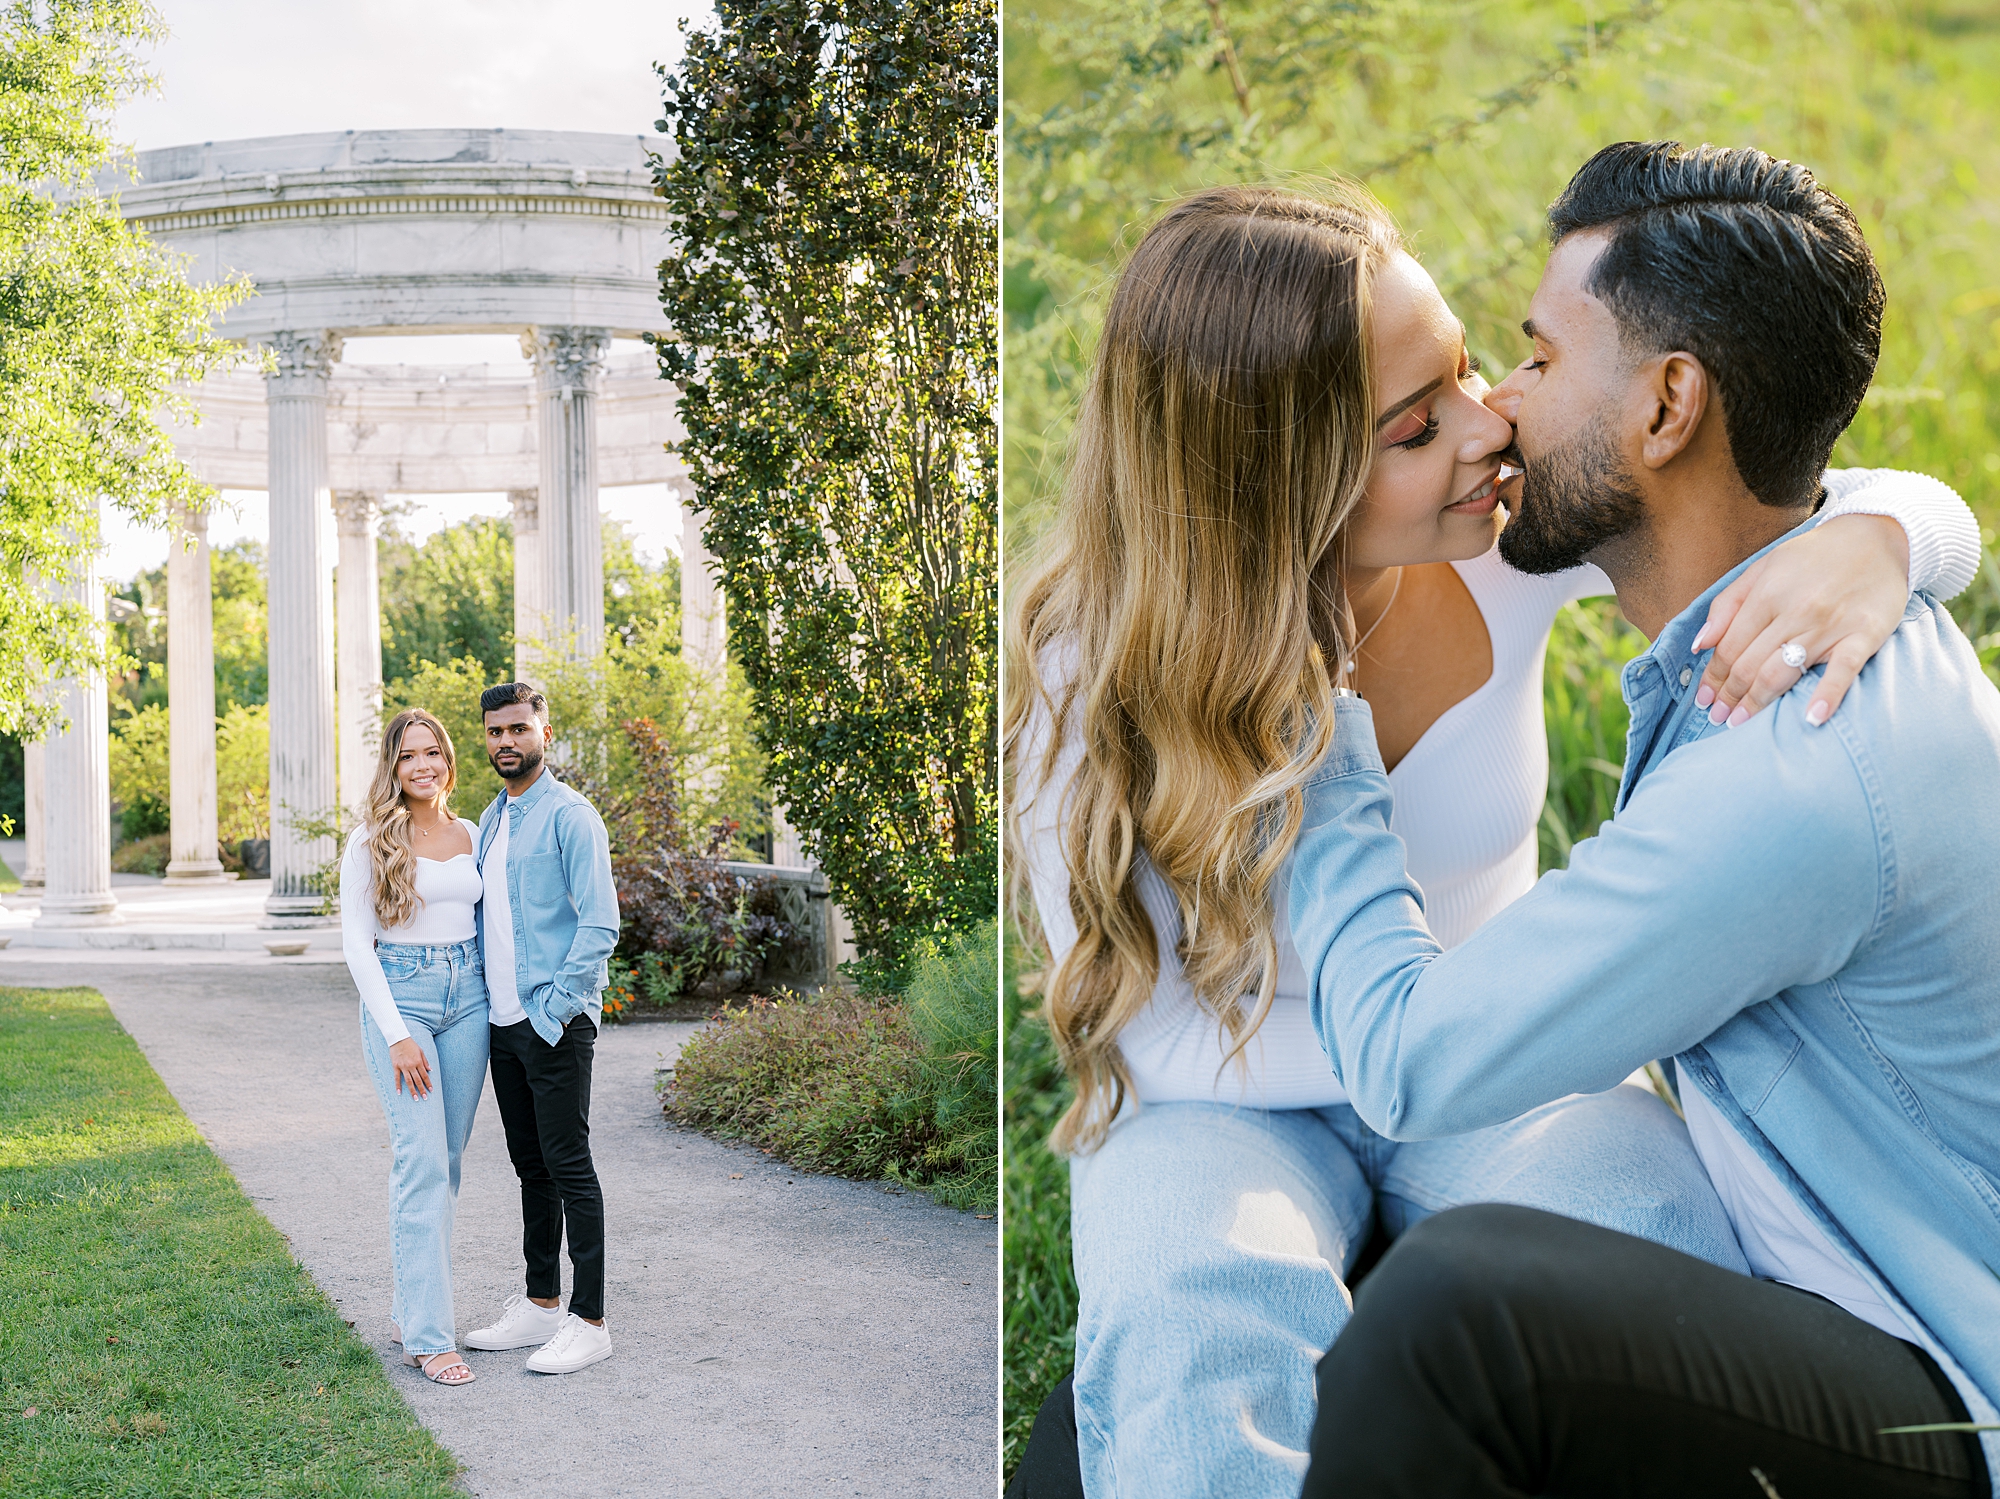 engaged couple kisses by stone pillars in Untemyer Gardens Conservancy